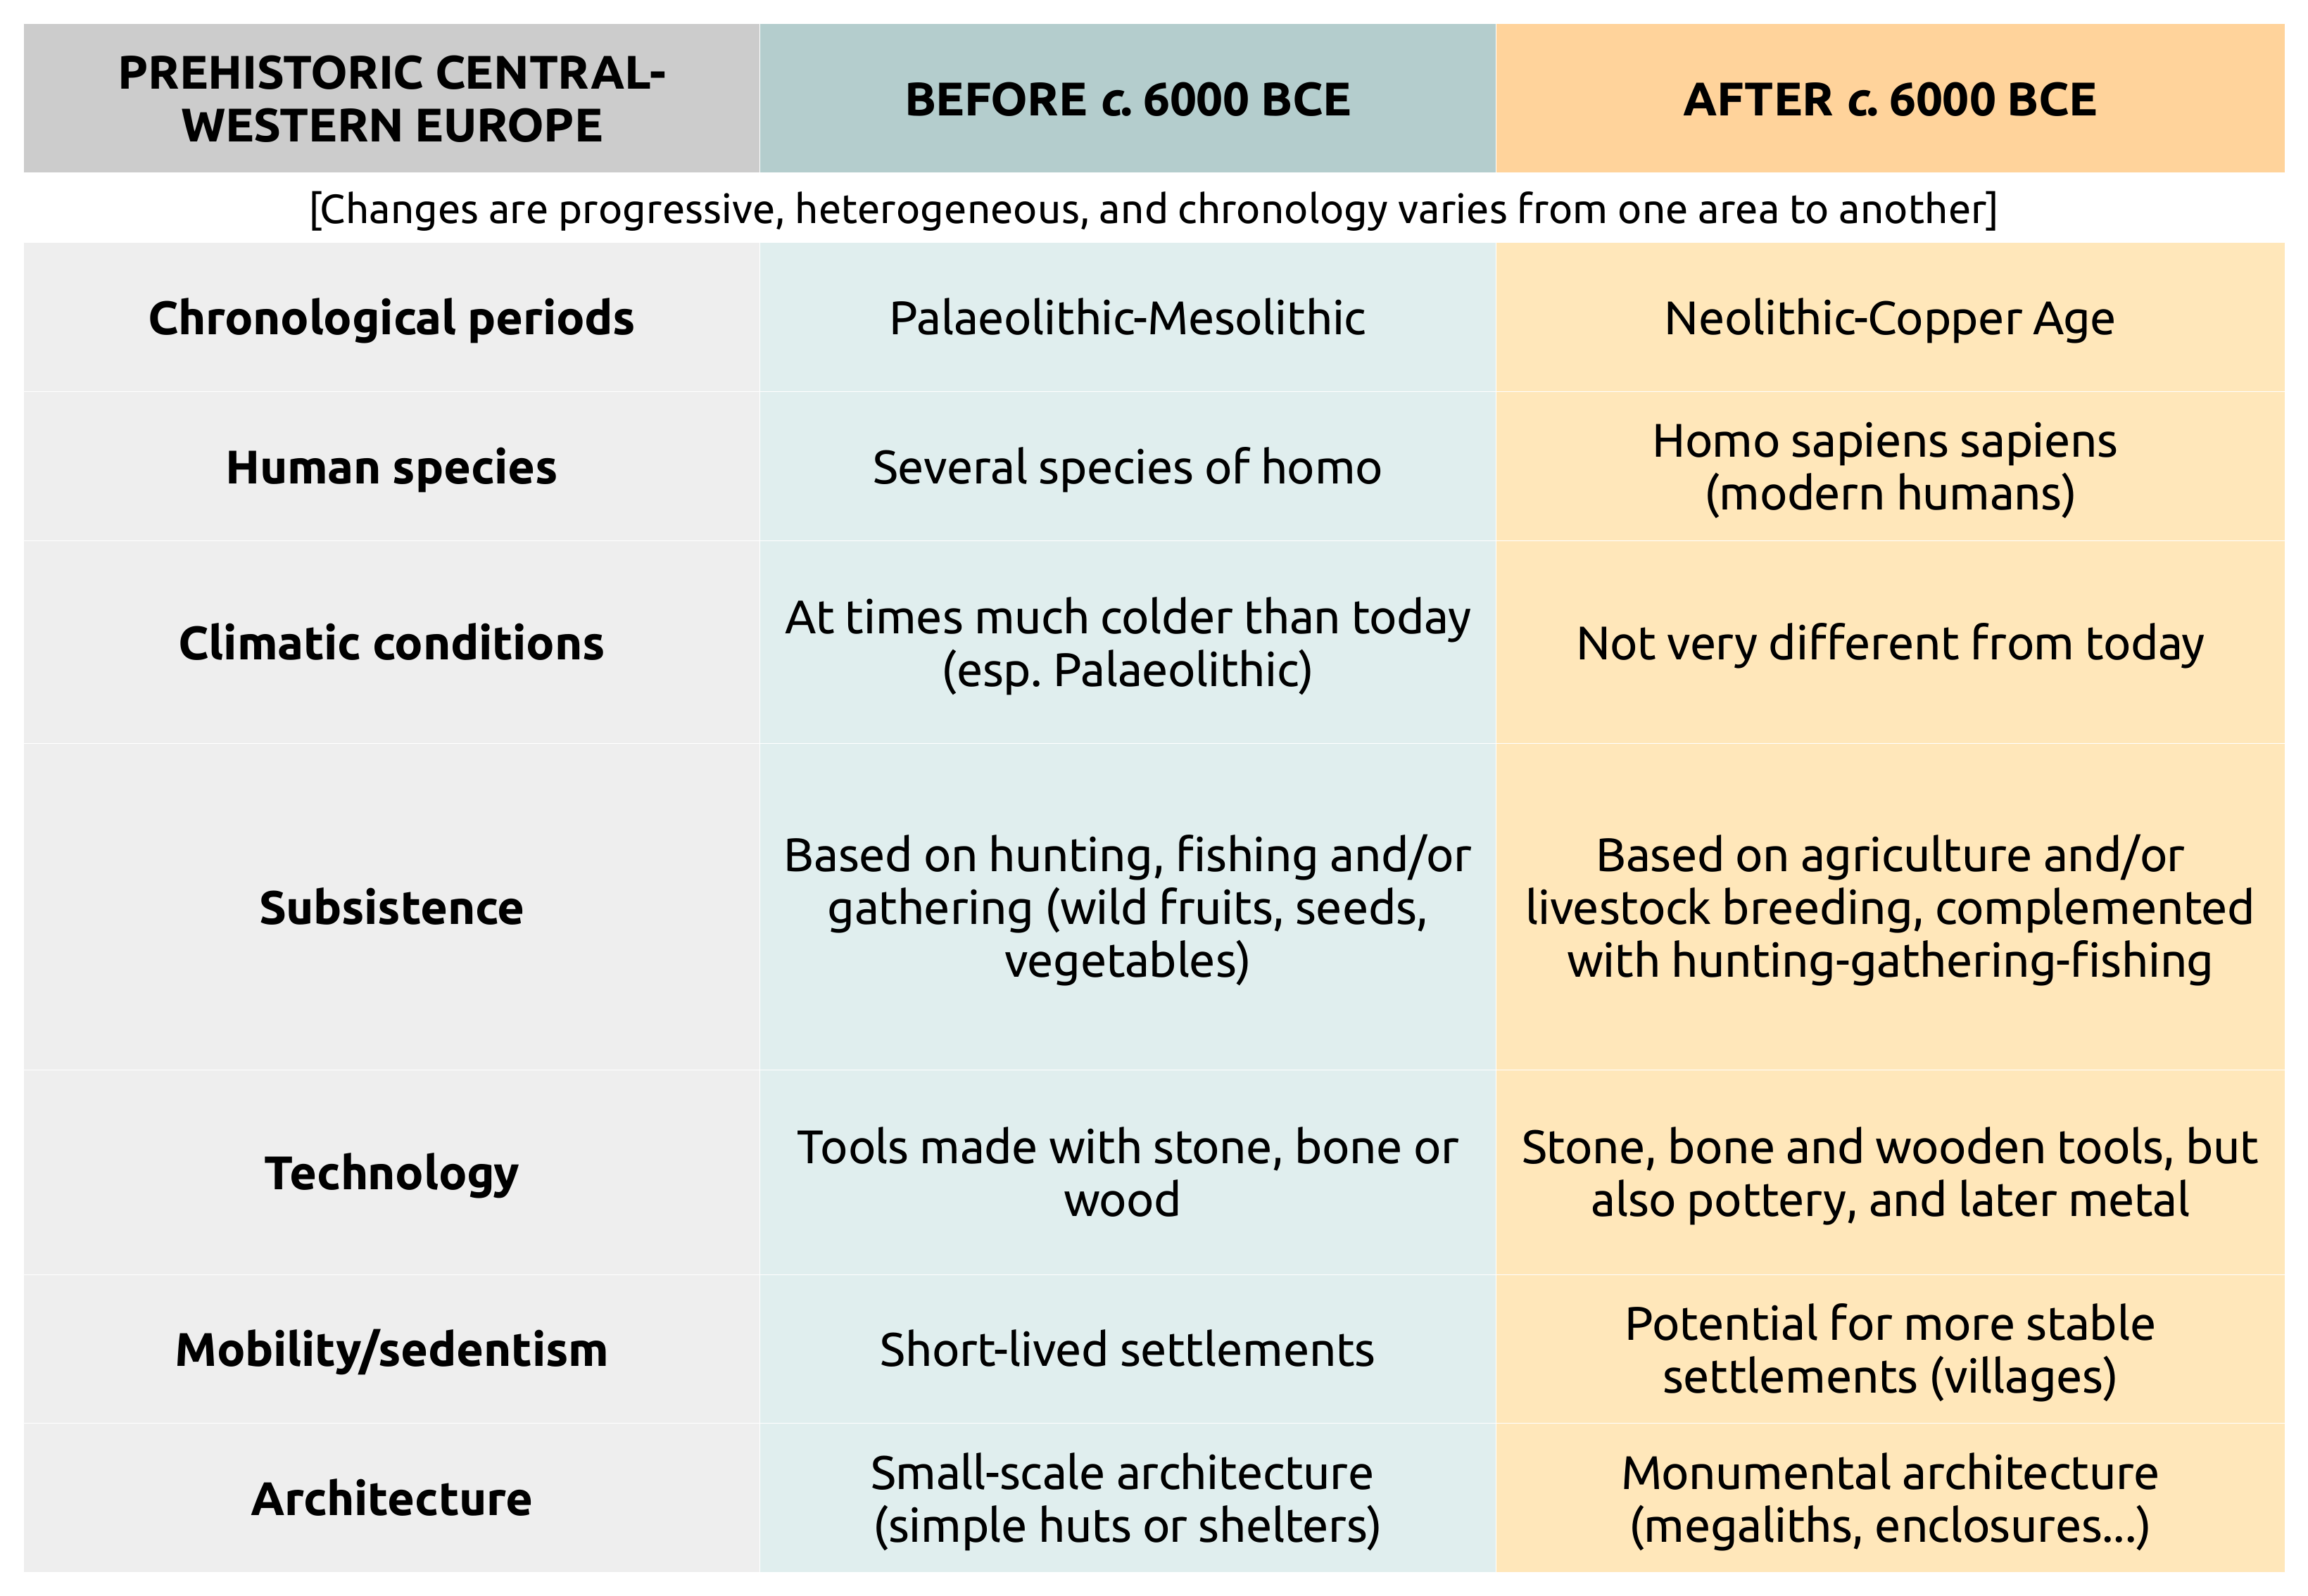 comparison between paleolithic and neolithic age